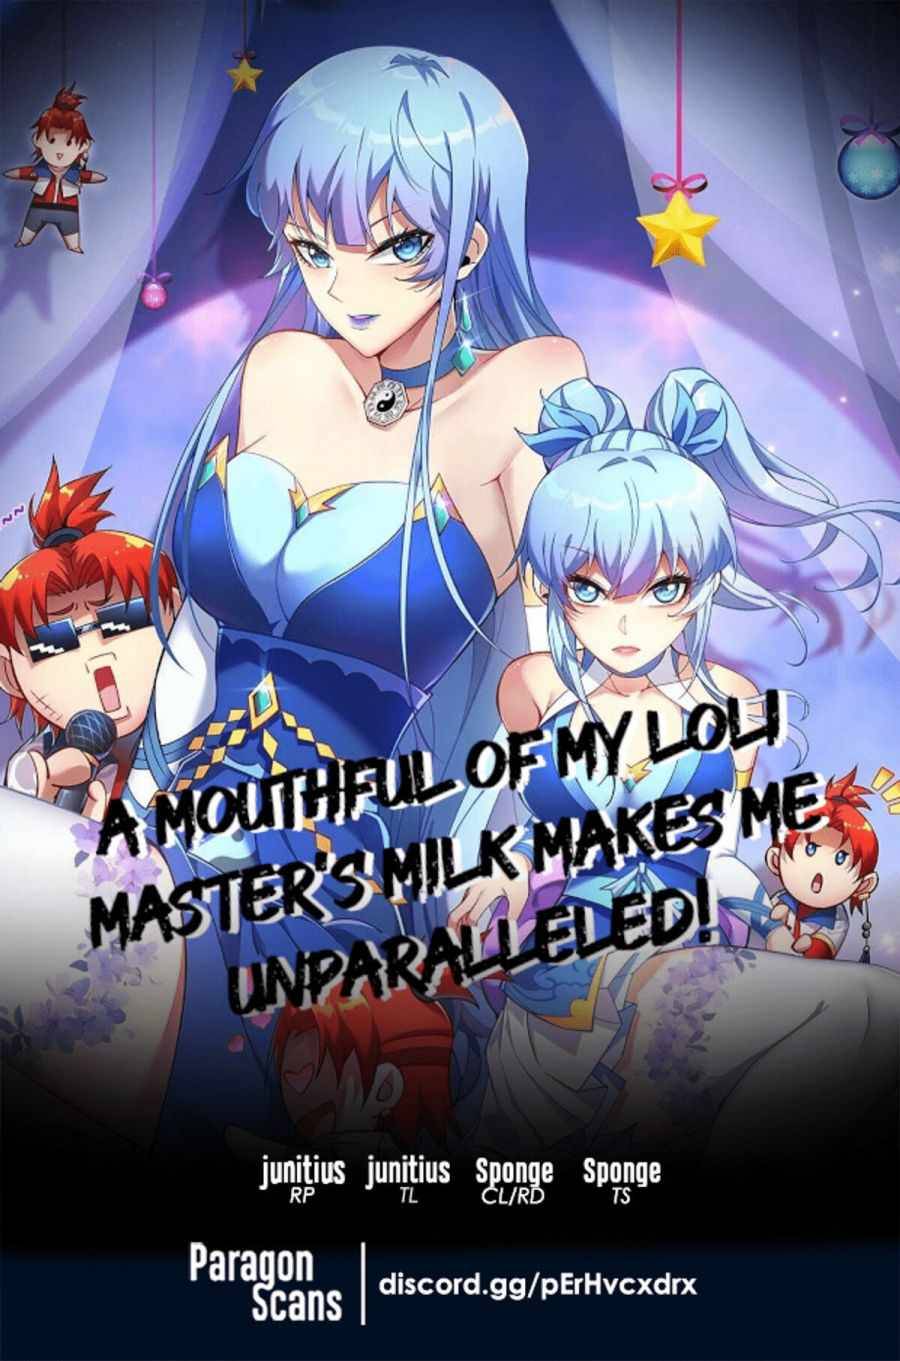 A Mouthful of My L0li Master's Milk Makes Me Unparalleled - chapter 13 - #1